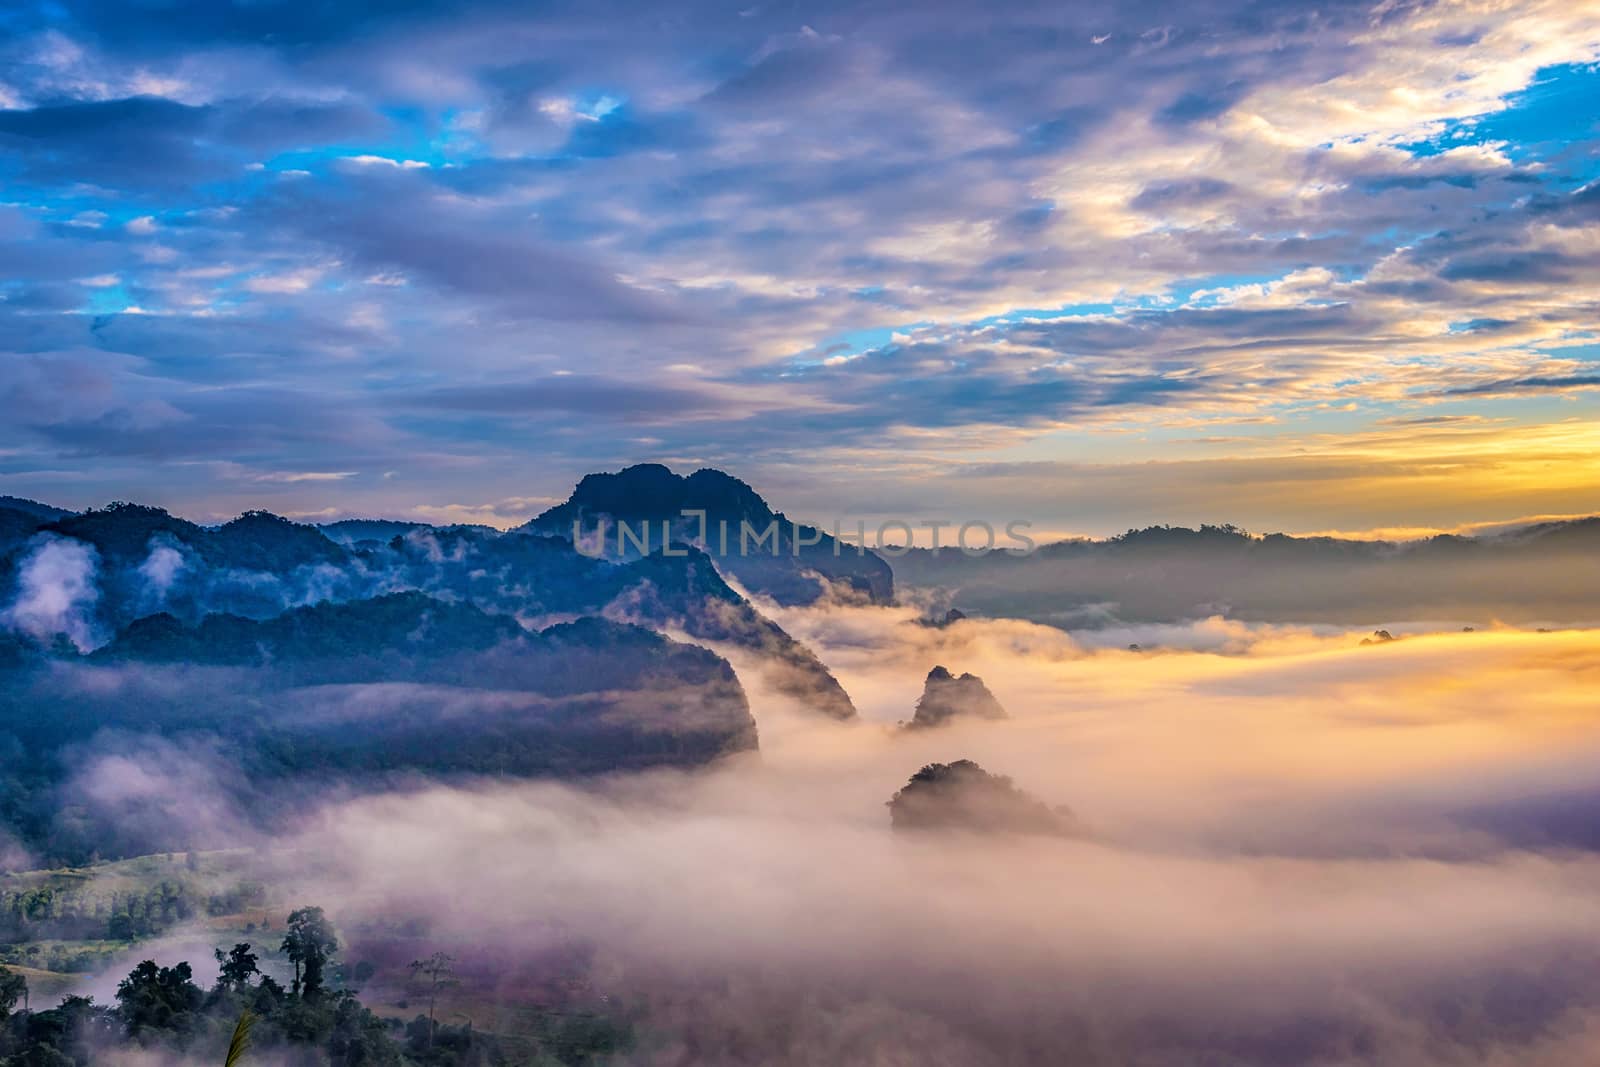 Landscape of Morning Mist with Mountain Layer at Phu Lanka National Park, Phayao province, north of Thailand.